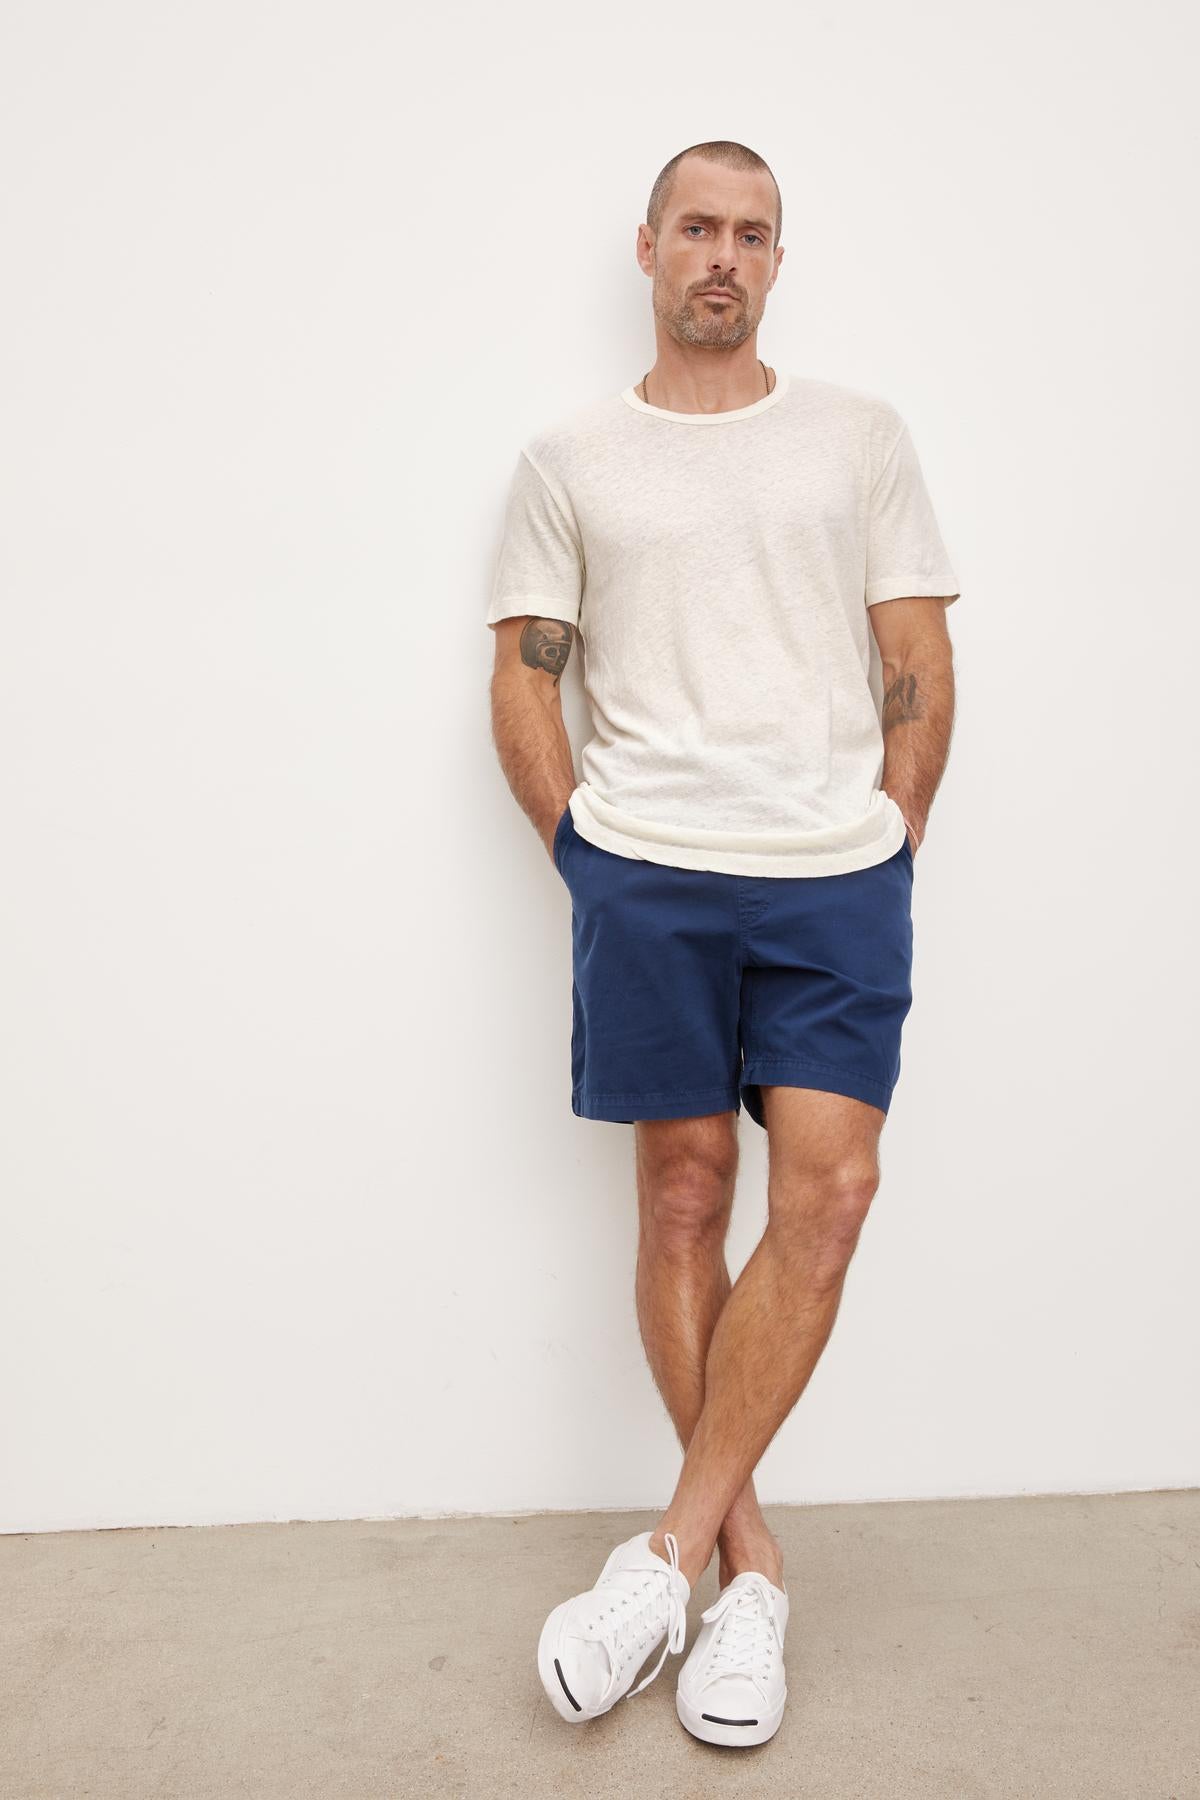   A man standing against a plain background, wearing a Velvet by Graham & Spencer Davey Tee, blue shorts, and white sneakers, with his right leg crossed over his left. 